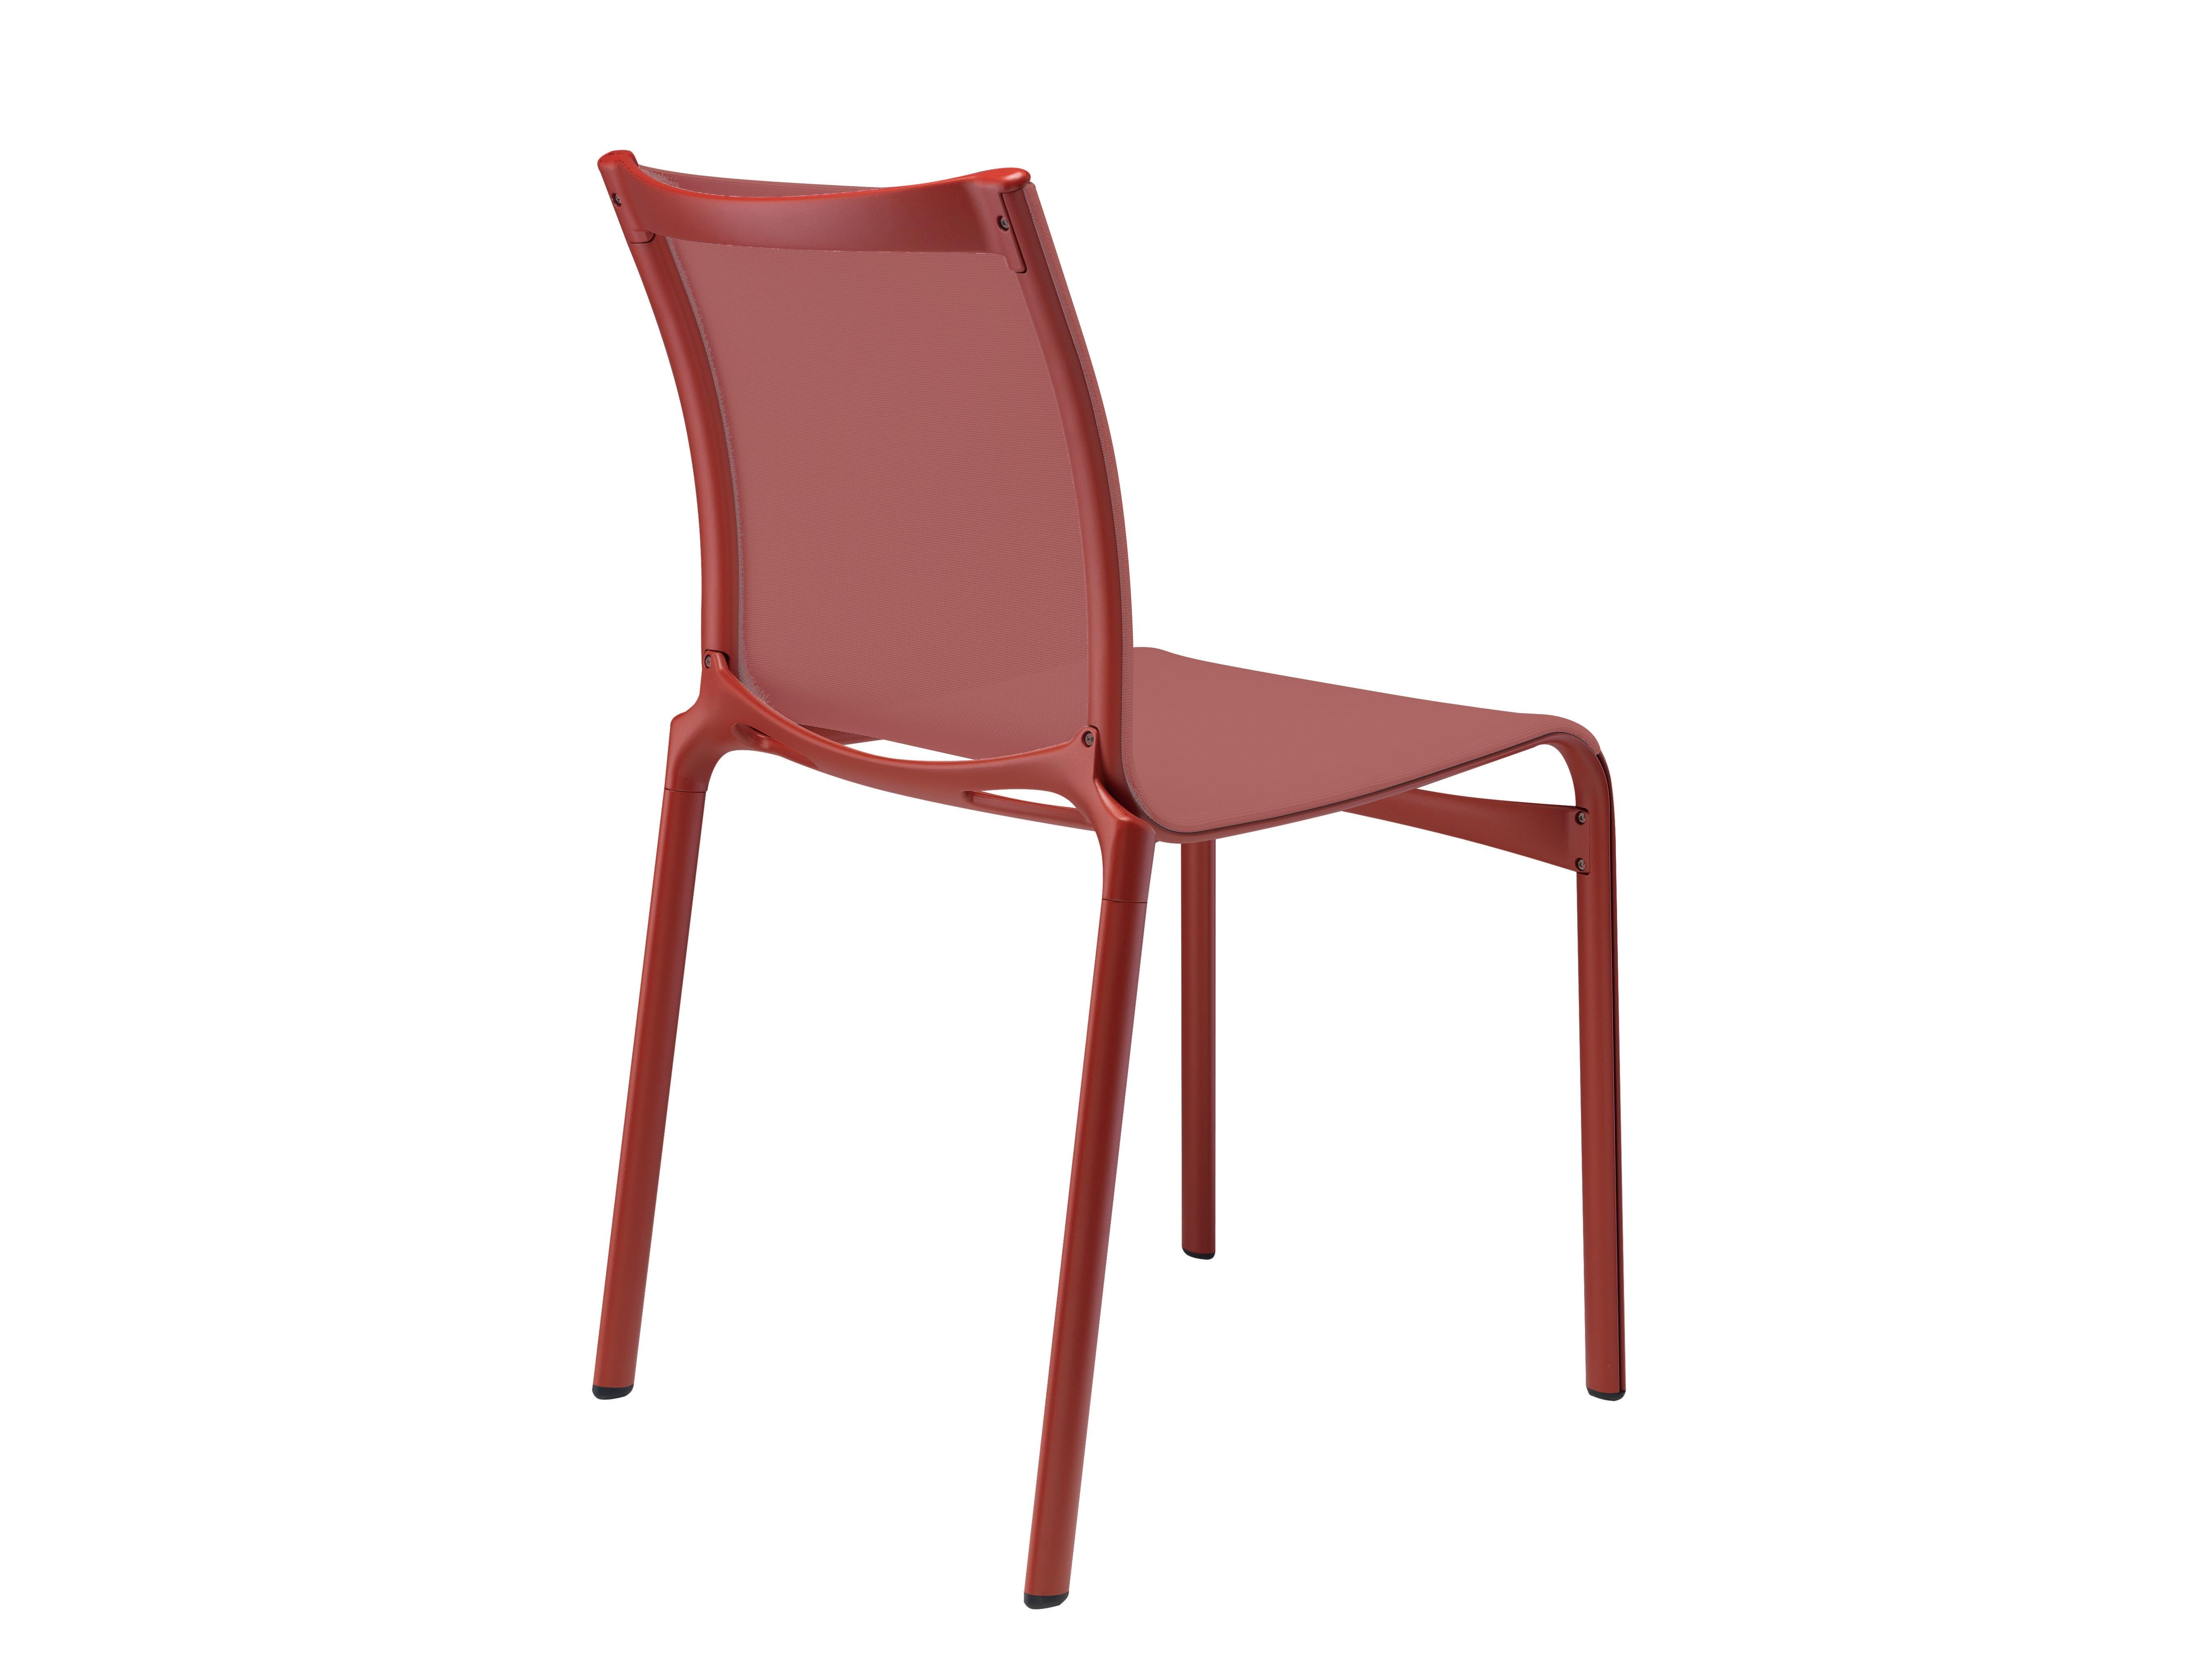 Alias Bigframe 44 Outdoor Chair in Coral Red Mesh with Lacquered Aluminium Frame by Alberto Meda

Stacking chair for outdoor use with structure made of extruded aluminium profile and die-cast aluminium elements, seat and back in fire retardant PVC